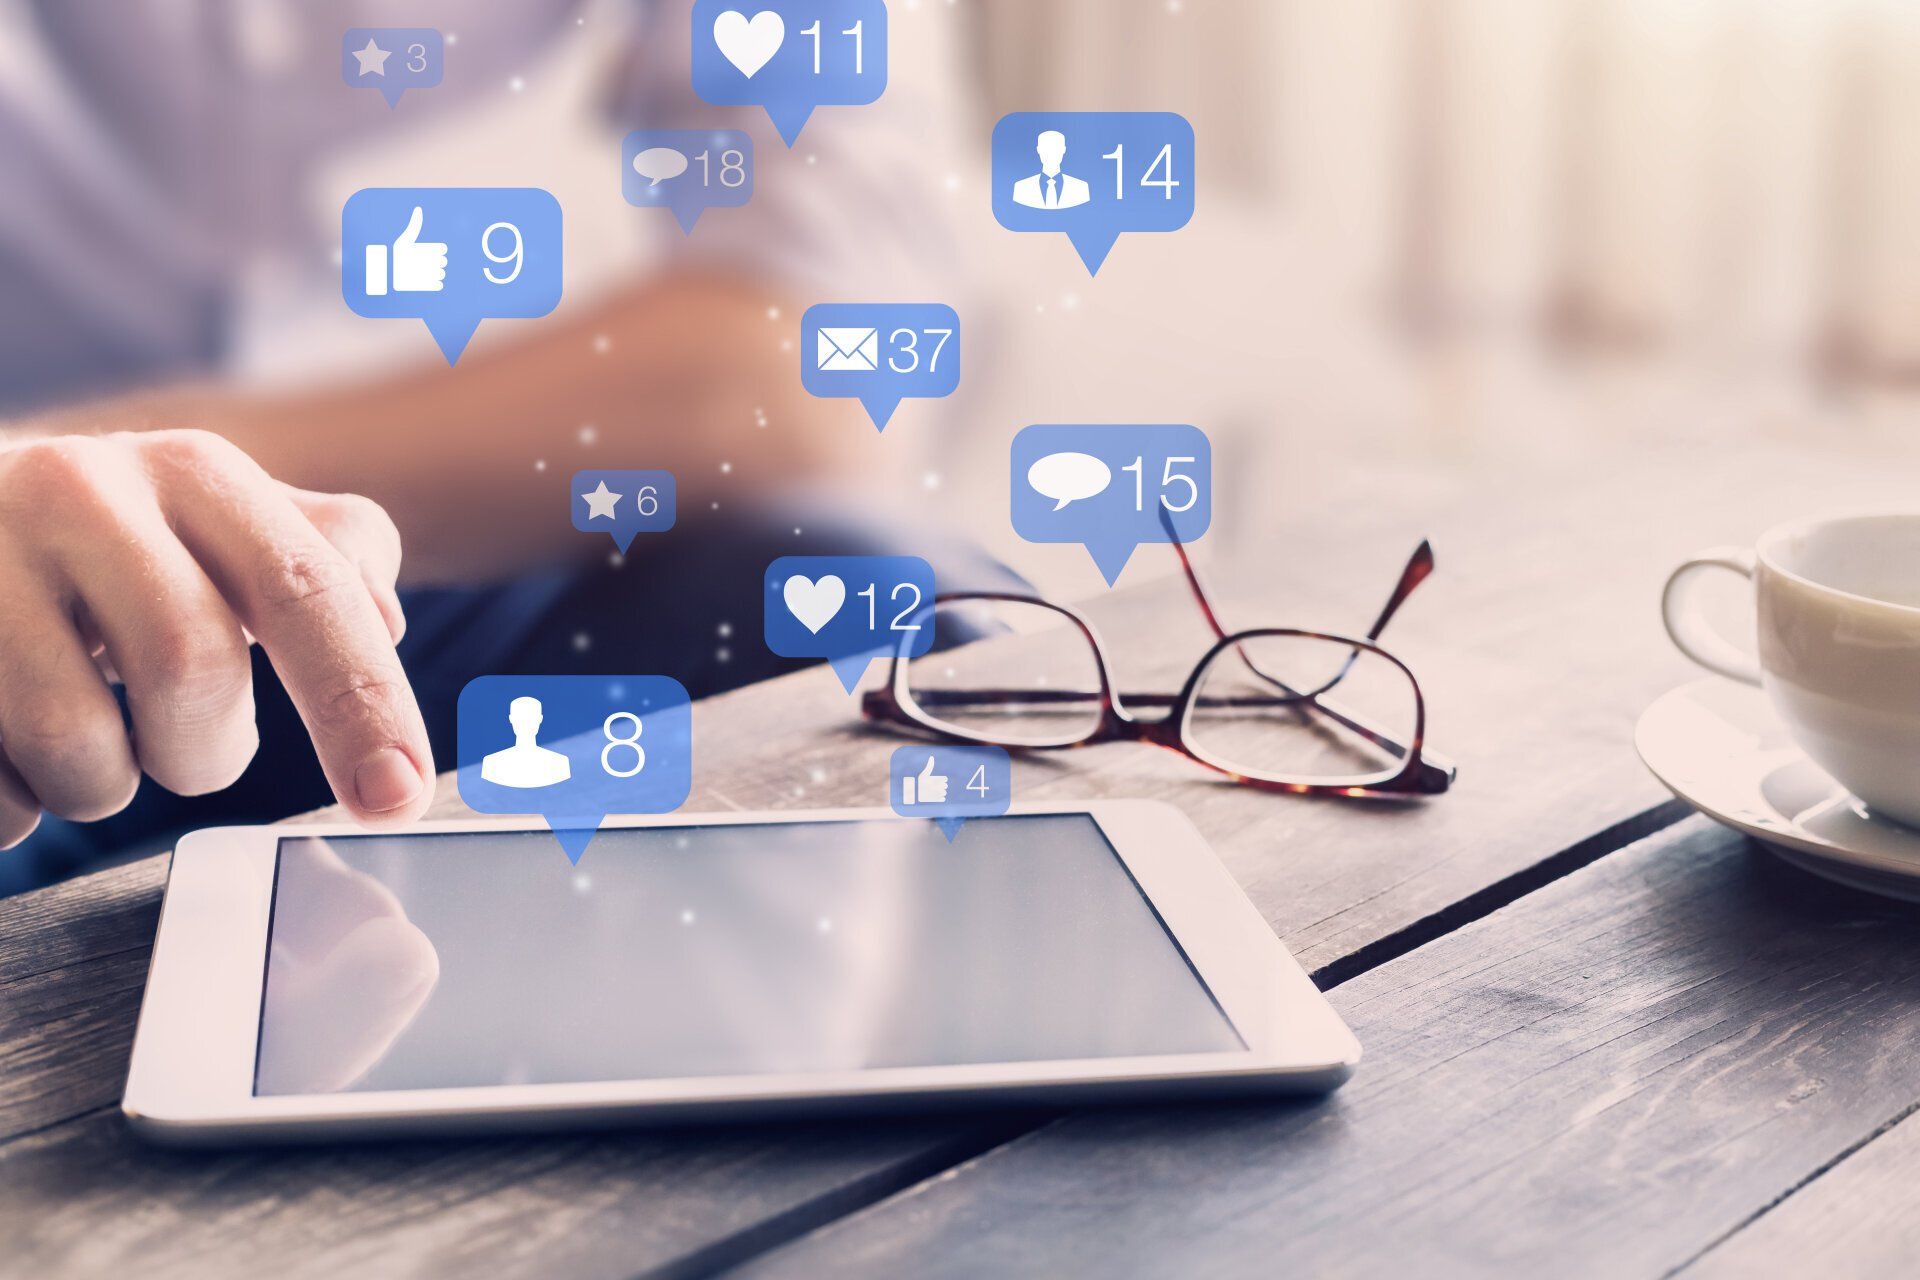 Social media posts relevant to your business